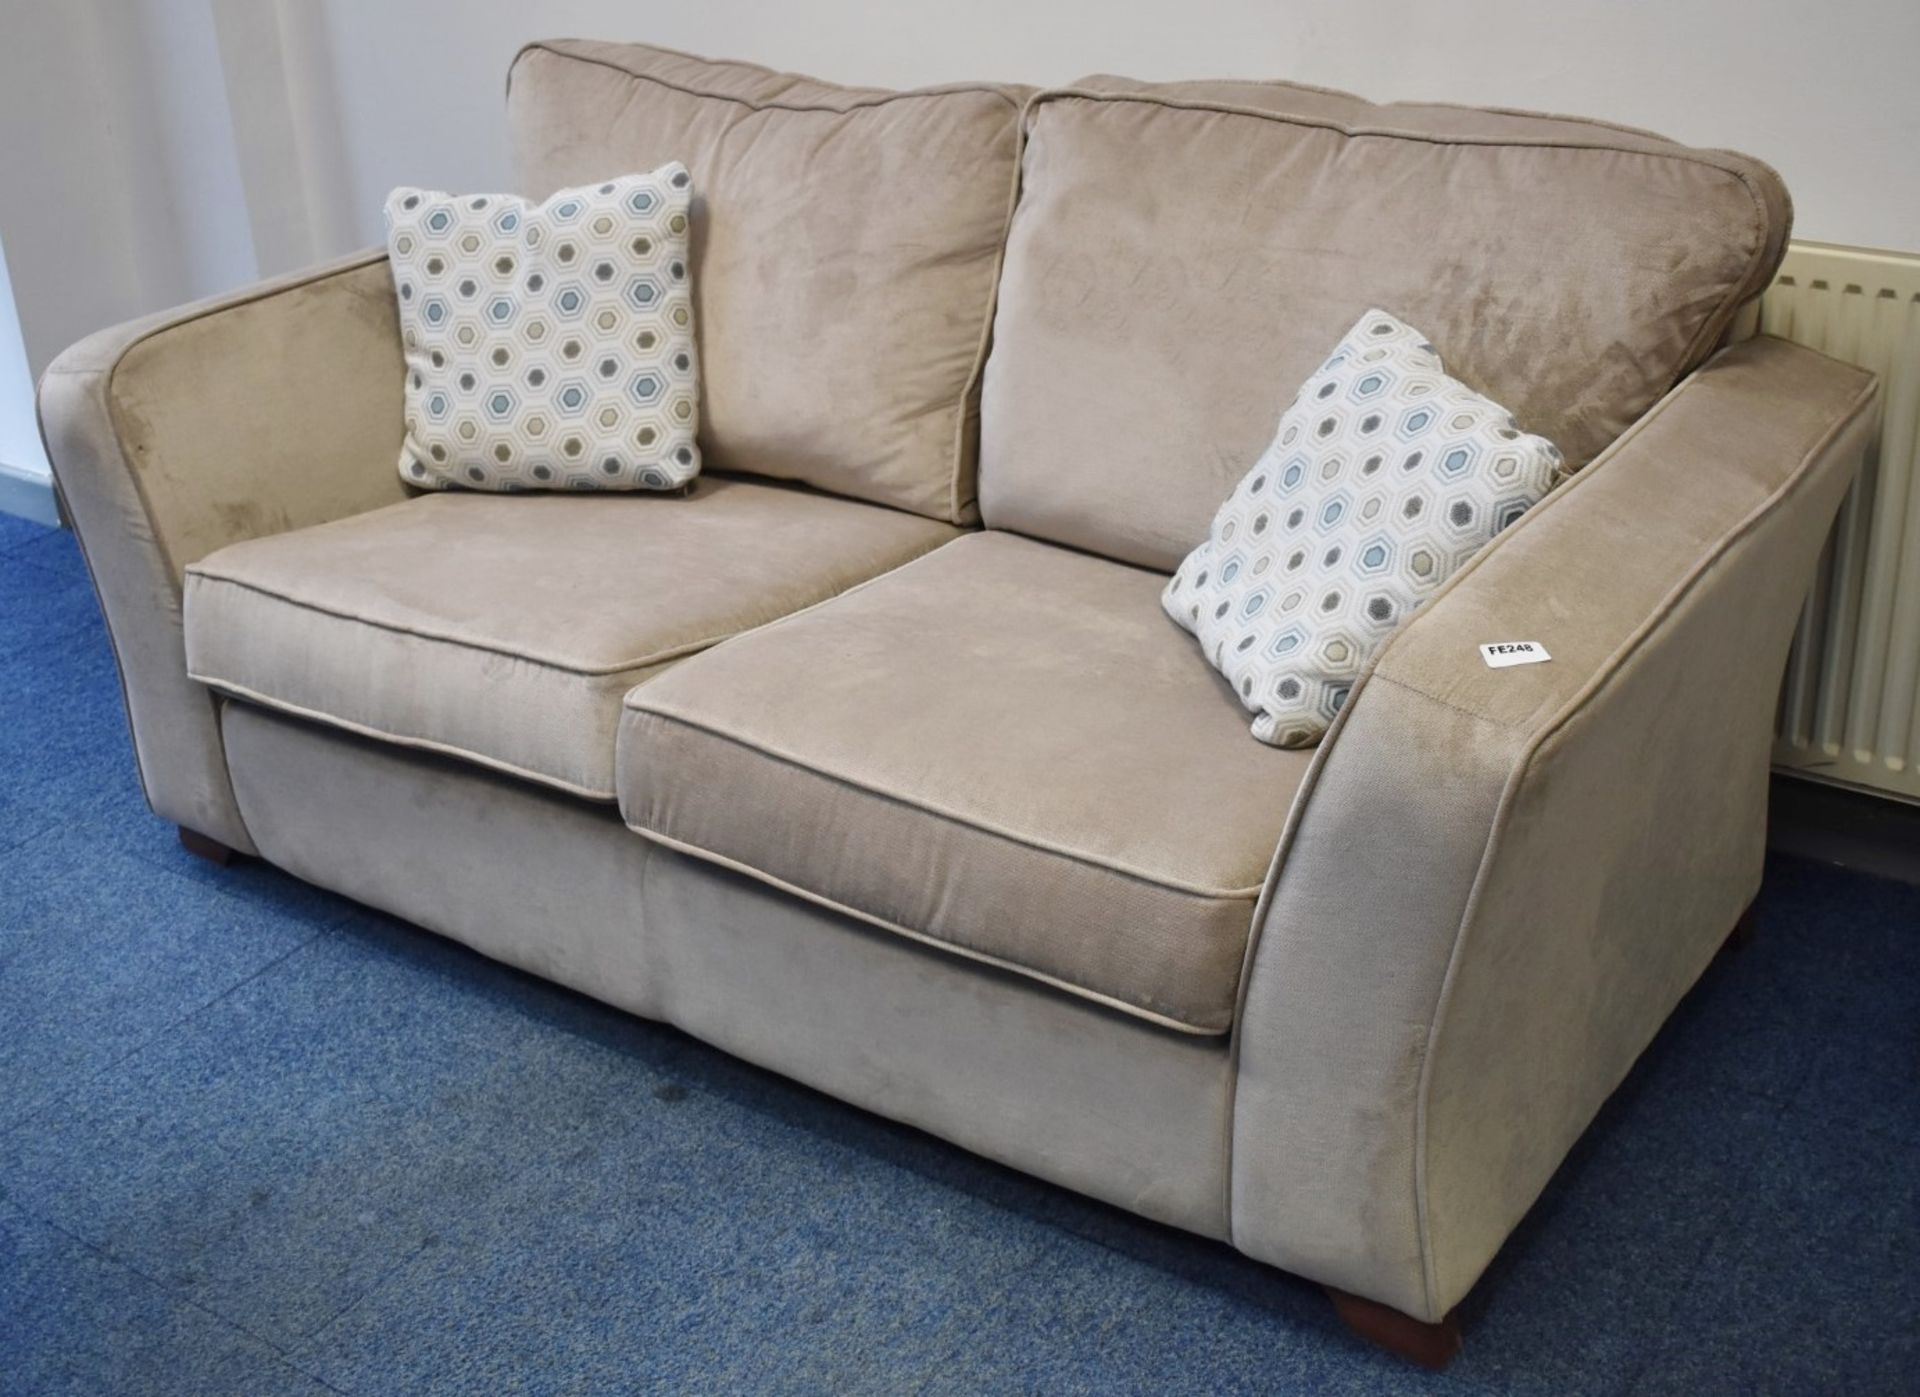 1 x Comfortable Sofa in Light Fabric With Scatter Pillows - 180cm Width - Very Good Condition - - Bild 2 aus 3